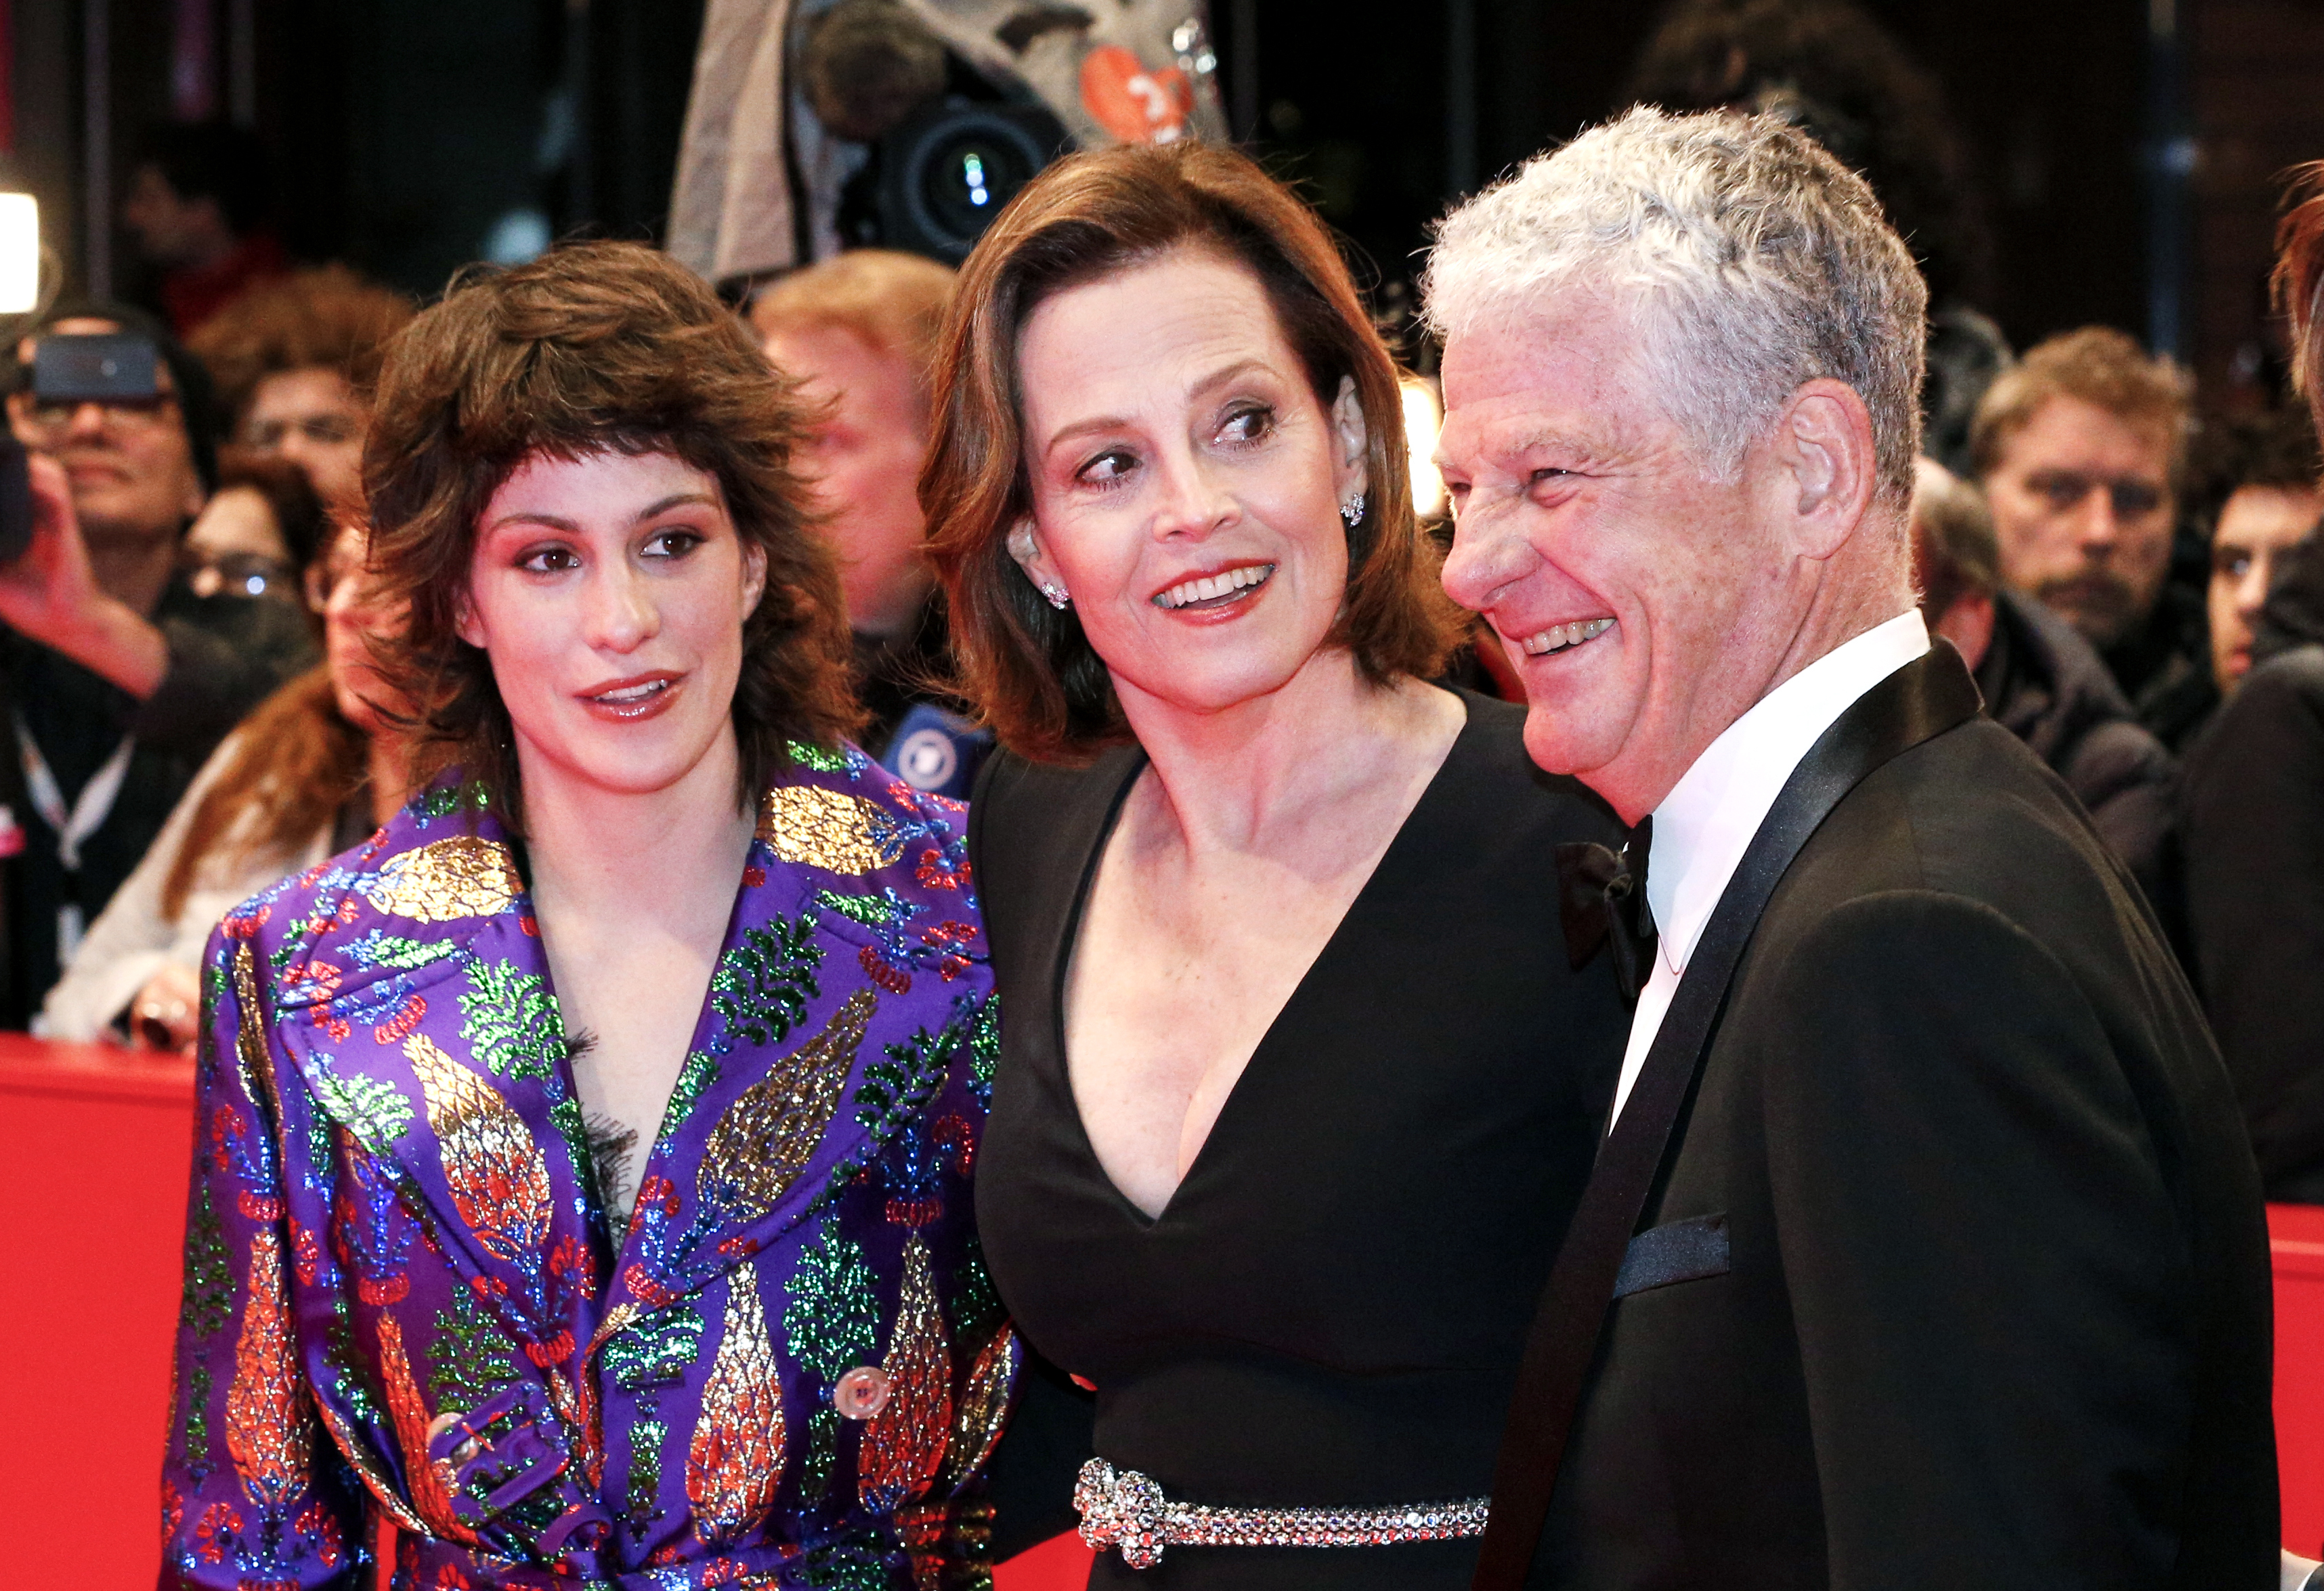 Charlotte Simpson, Sigourney Weaver, and Jim Simpson at the opening ceremony and premiere of "My Salinger Year" during the 70th Berlinale International Film Festival Berlin on February 20, 2020, in Berlin, Germany | Source: Getty Images